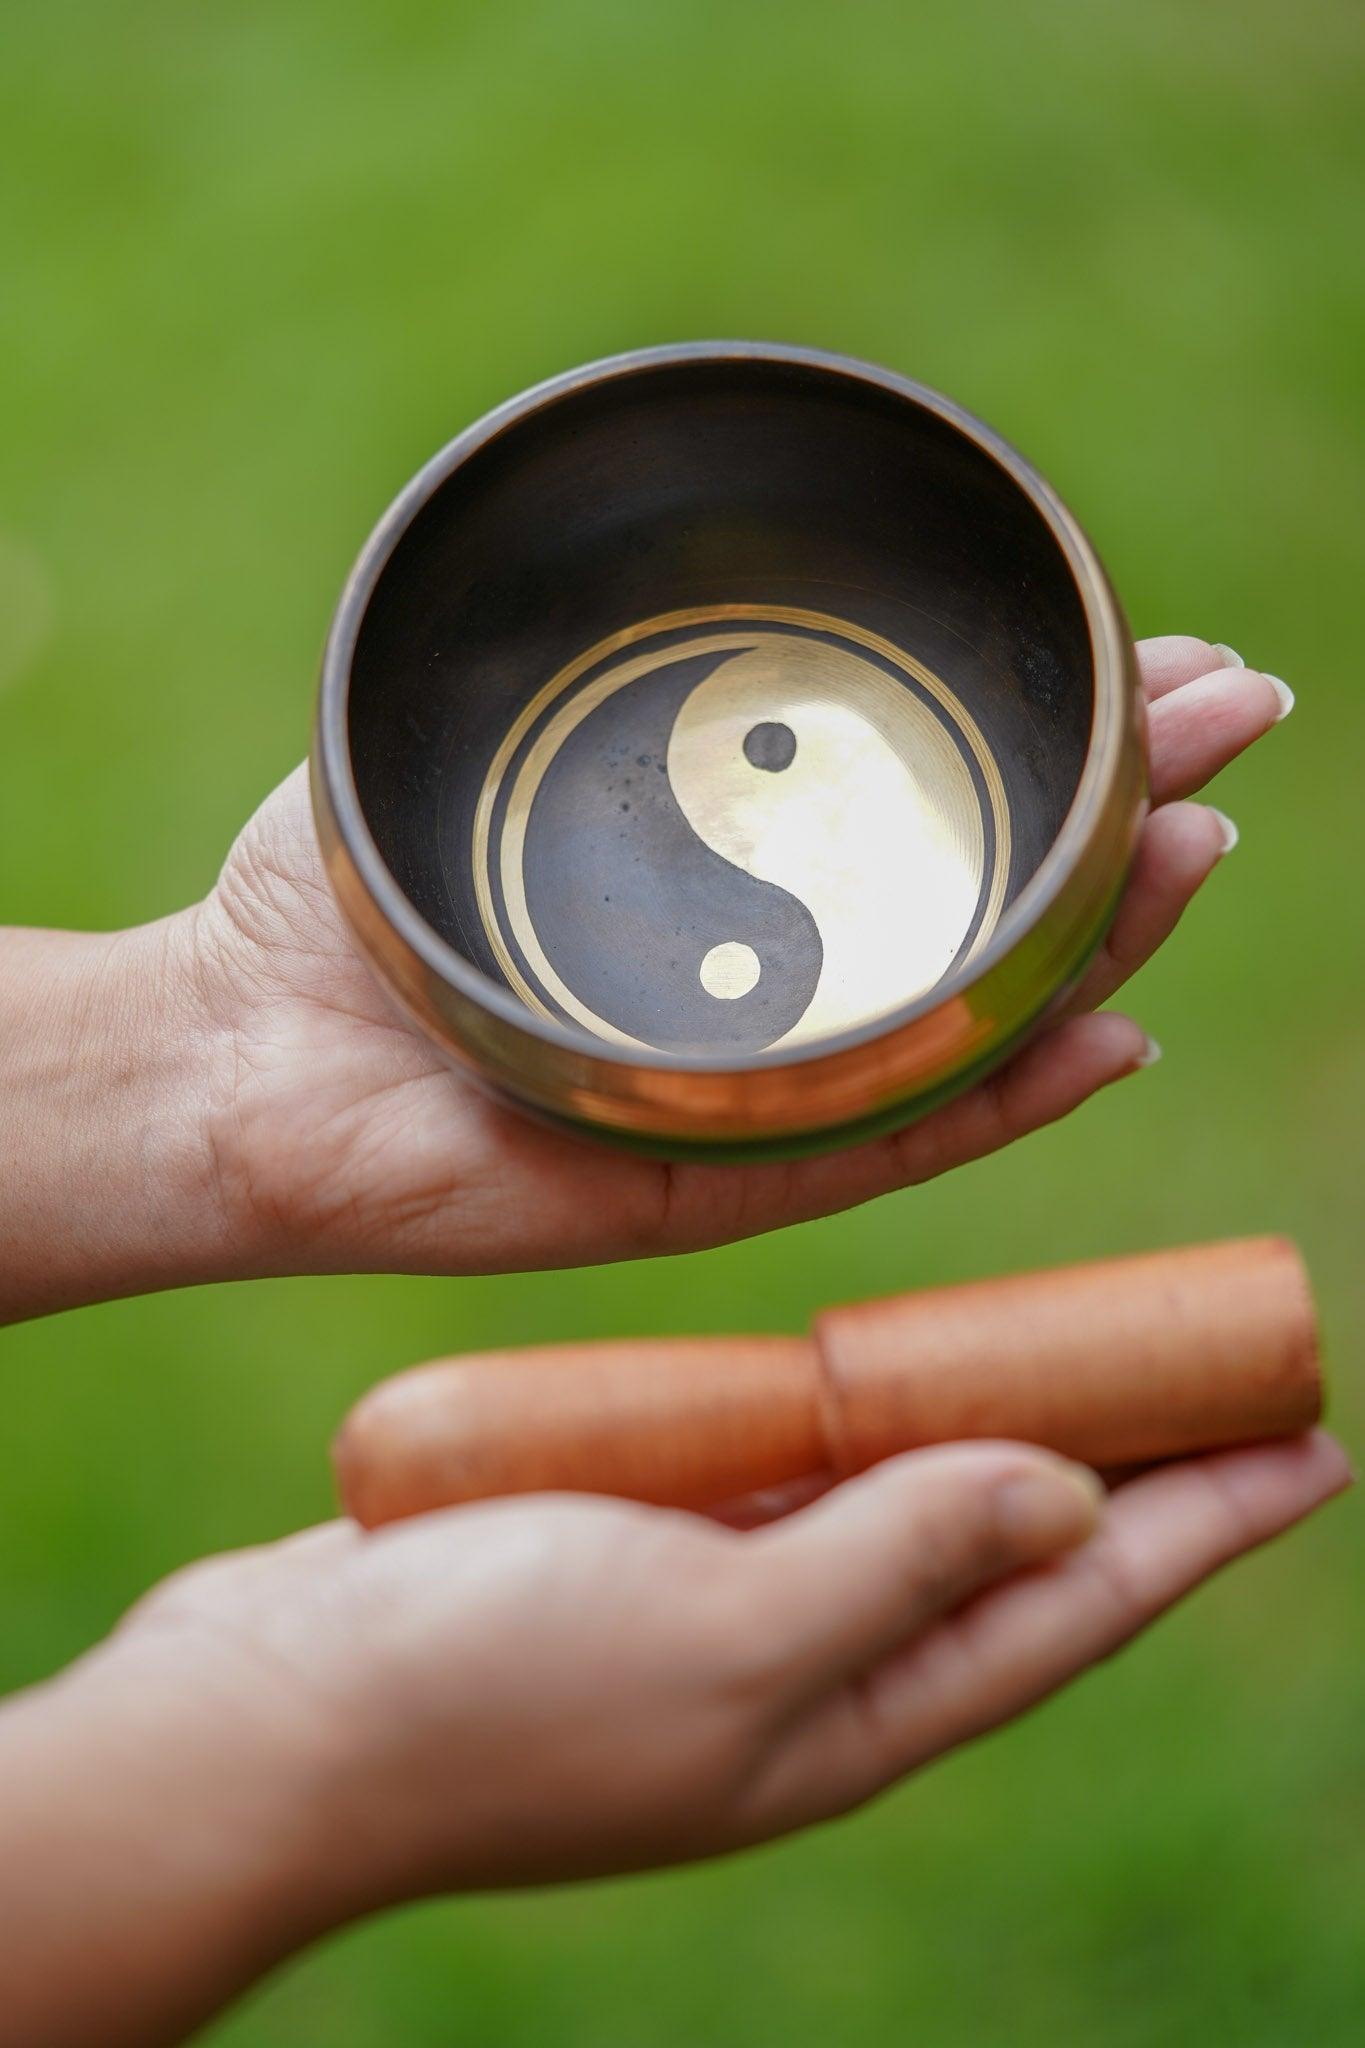 Ying Yang small size singing bowl for the beginner